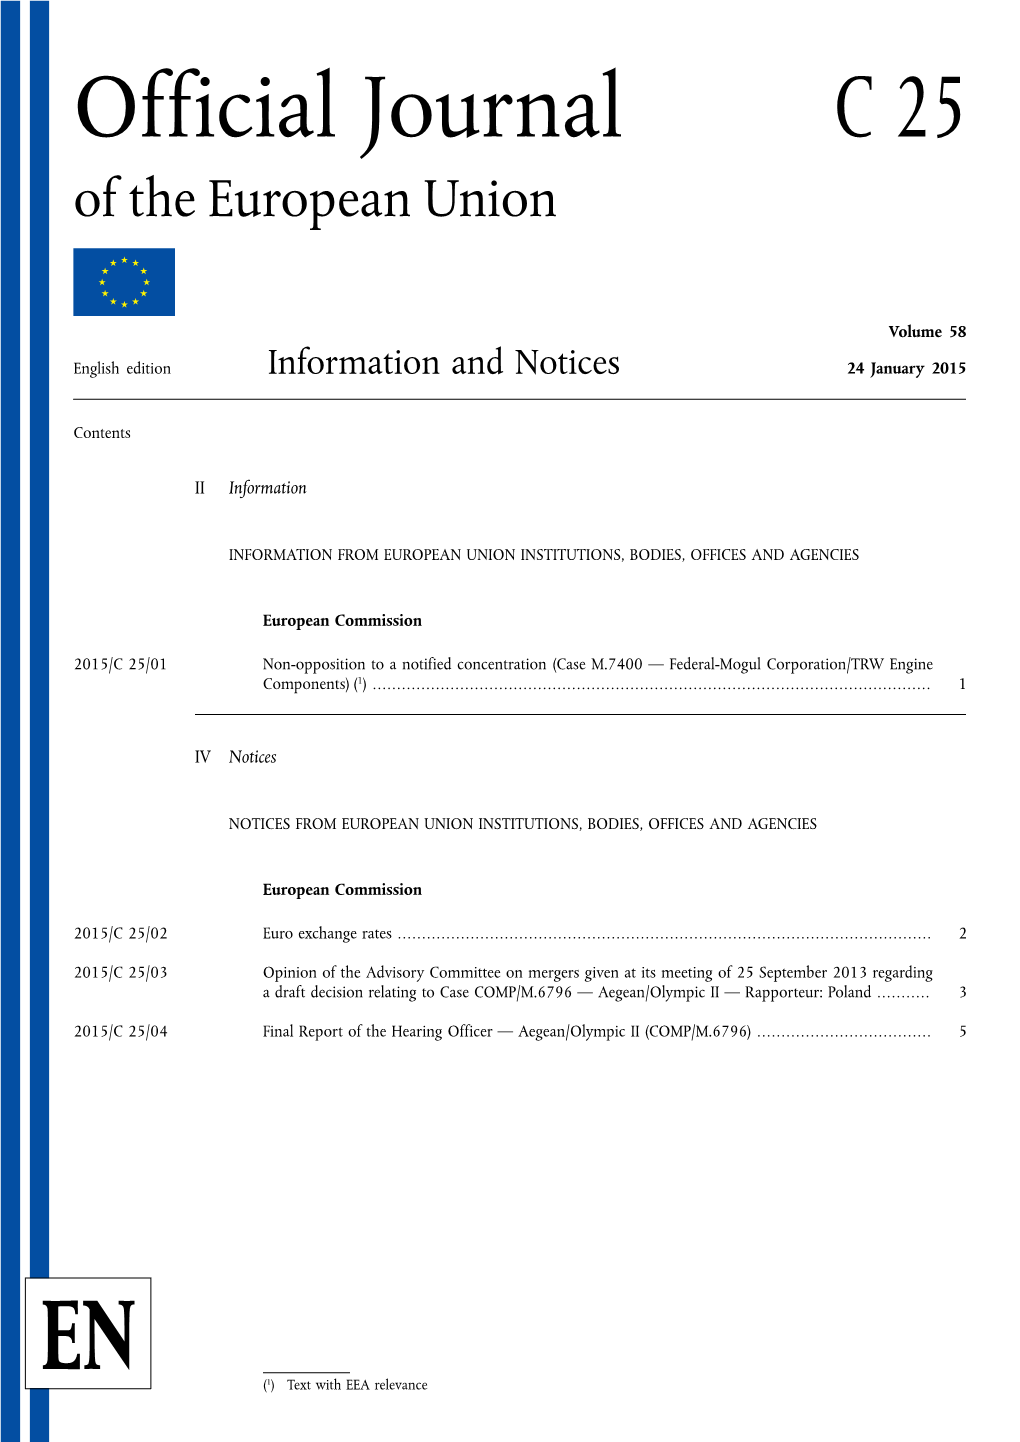 Official Journal C 25 of the European Union